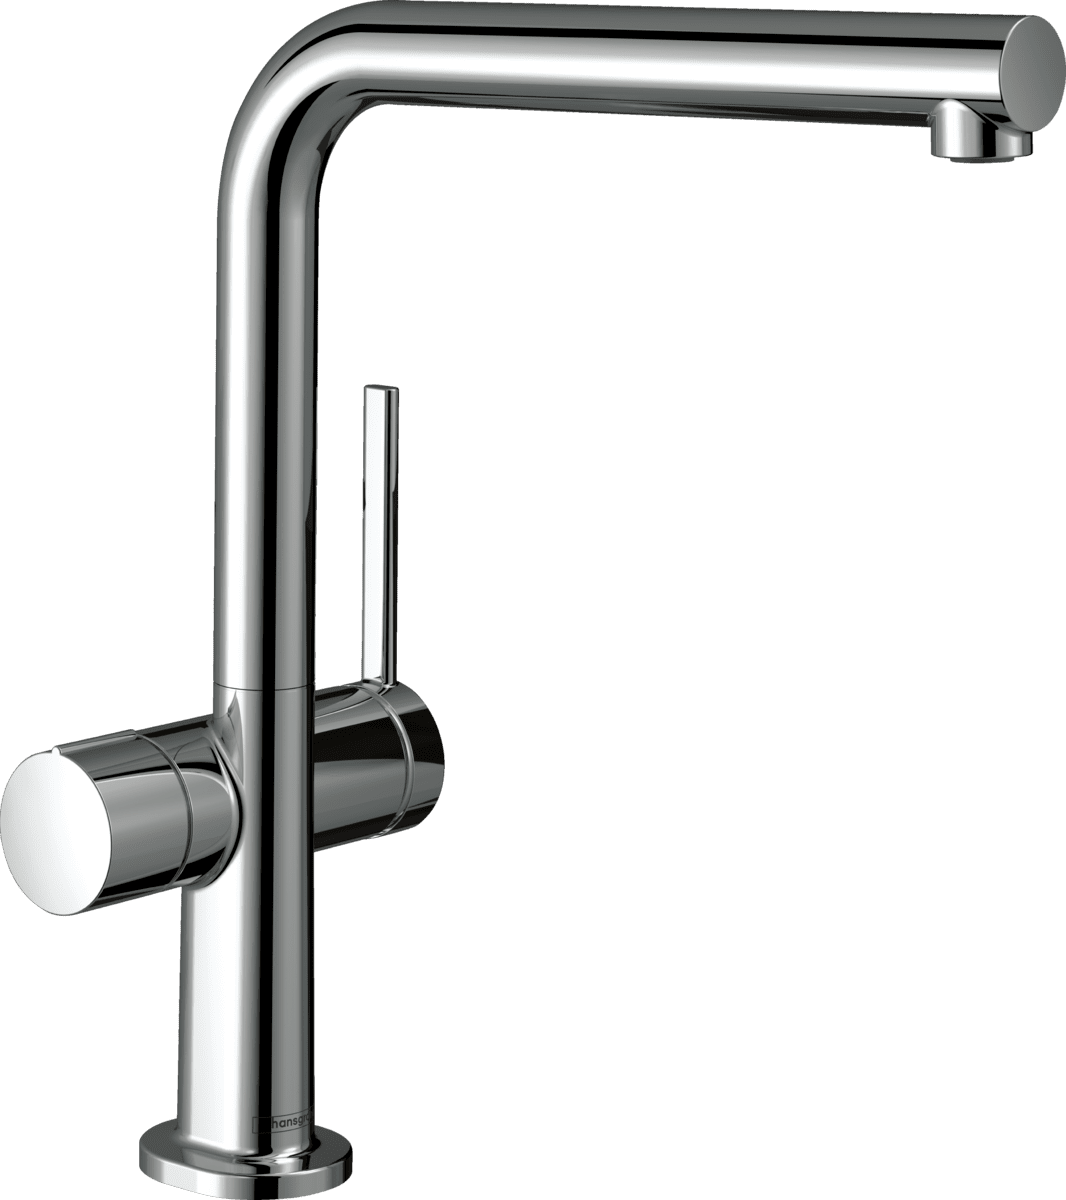 Picture of HANSGROHE Talis M54 Single lever kitchen mixer 270, device shut-off valve, 1jet #72827000 - Chrome